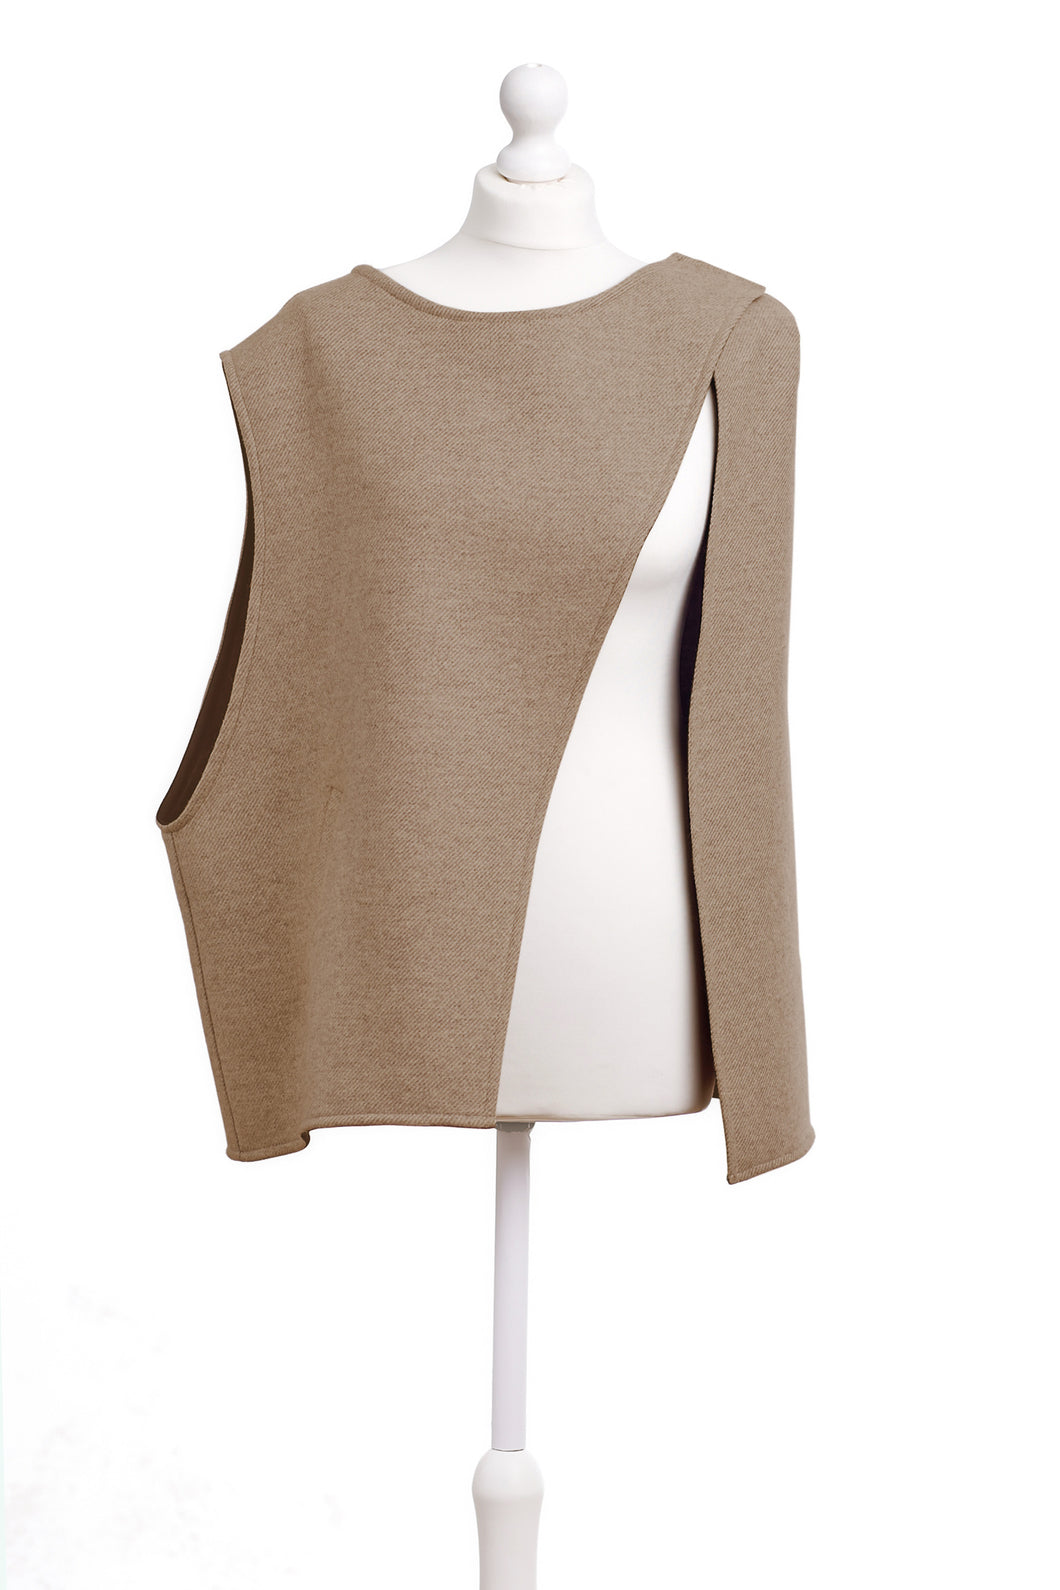 Beige Mixed Wool Cape/Vest - One-of-a-kind